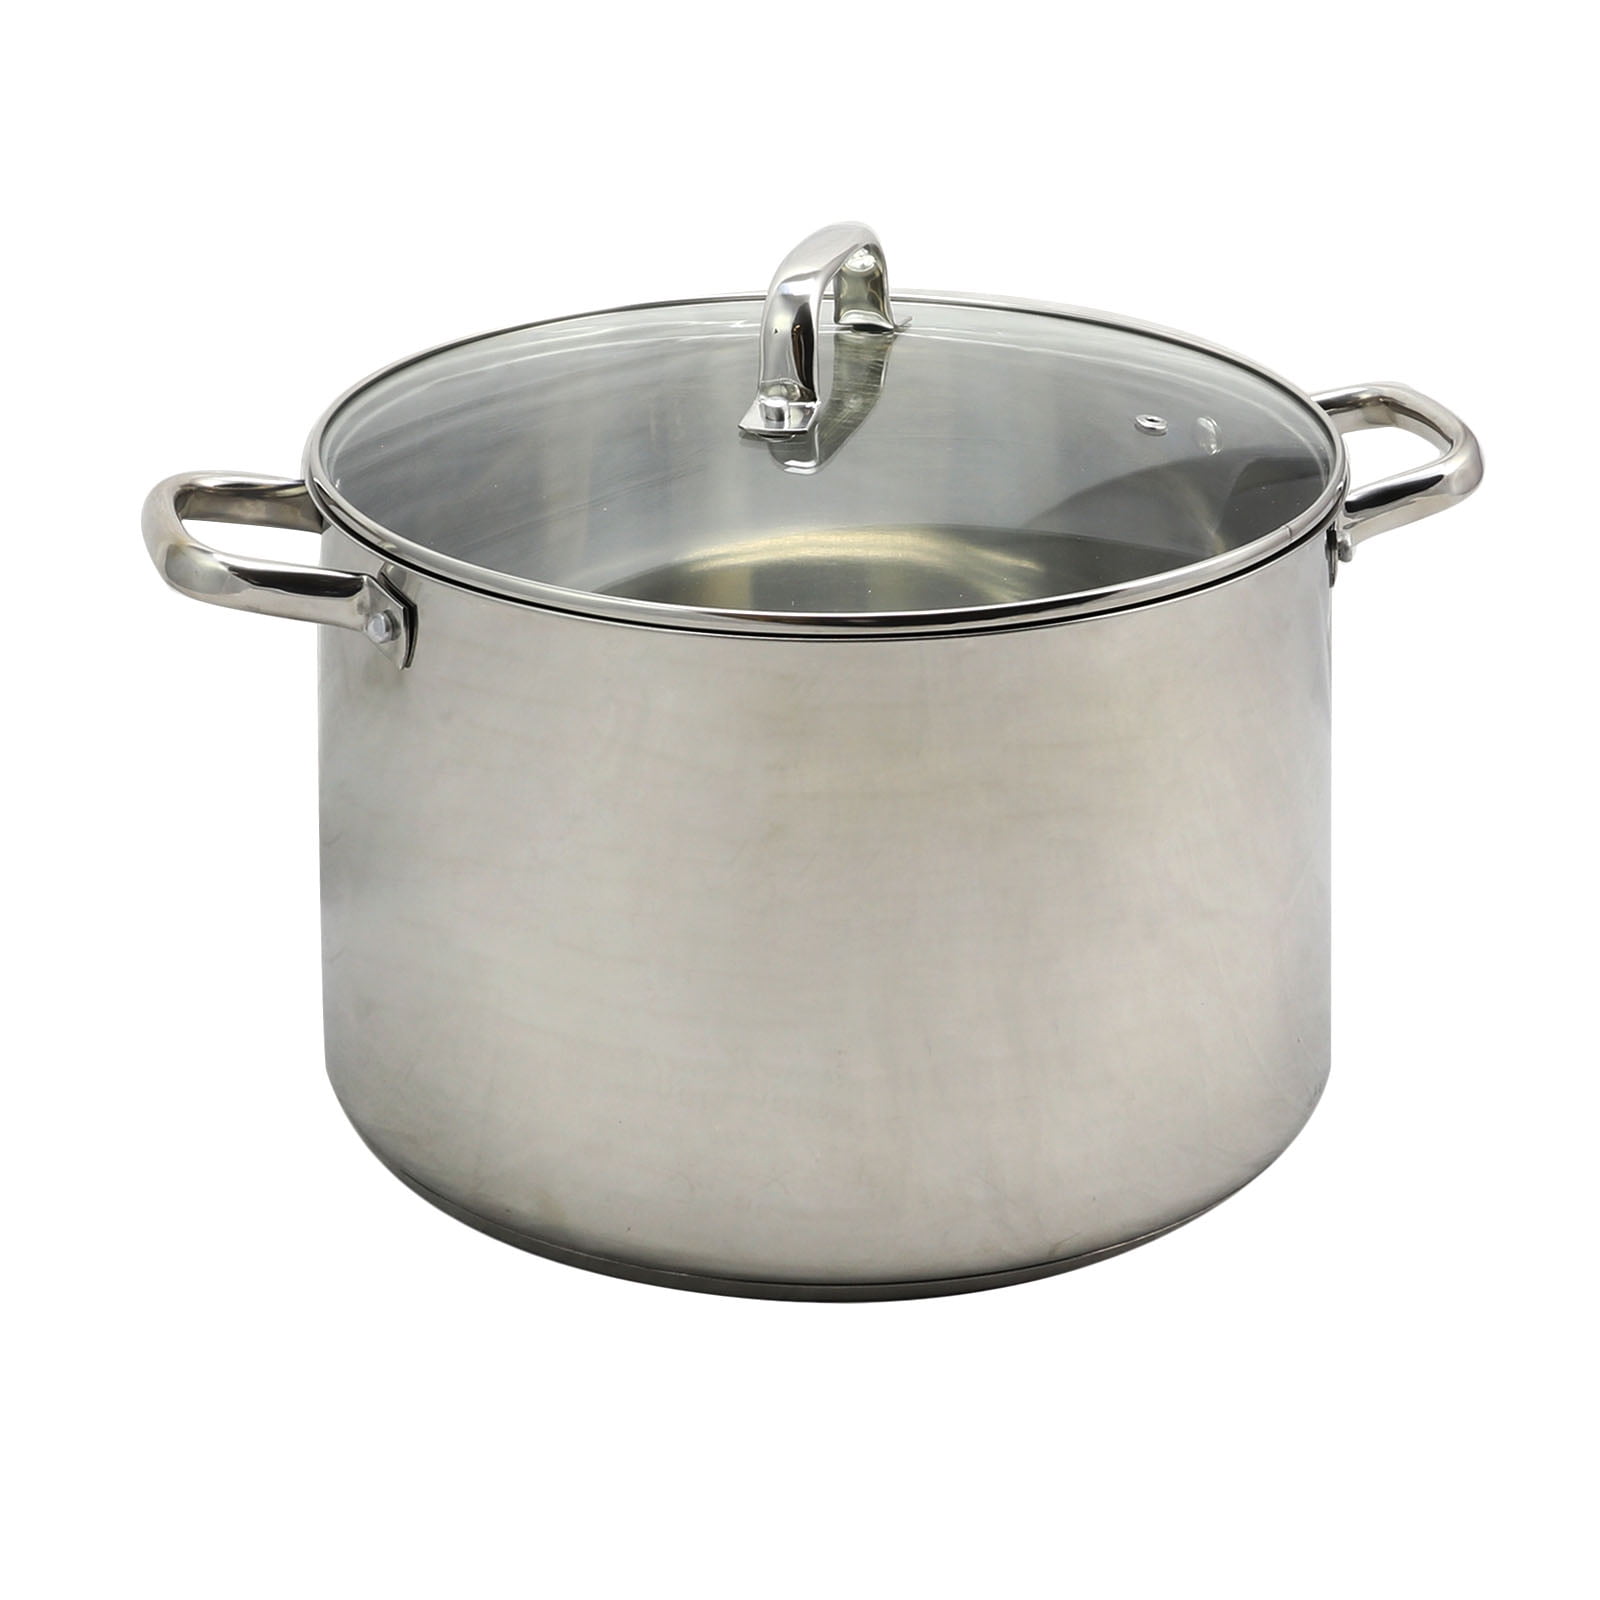 Oster Adenmore 8 Quart Stock Pot with Tempered Glass Lid